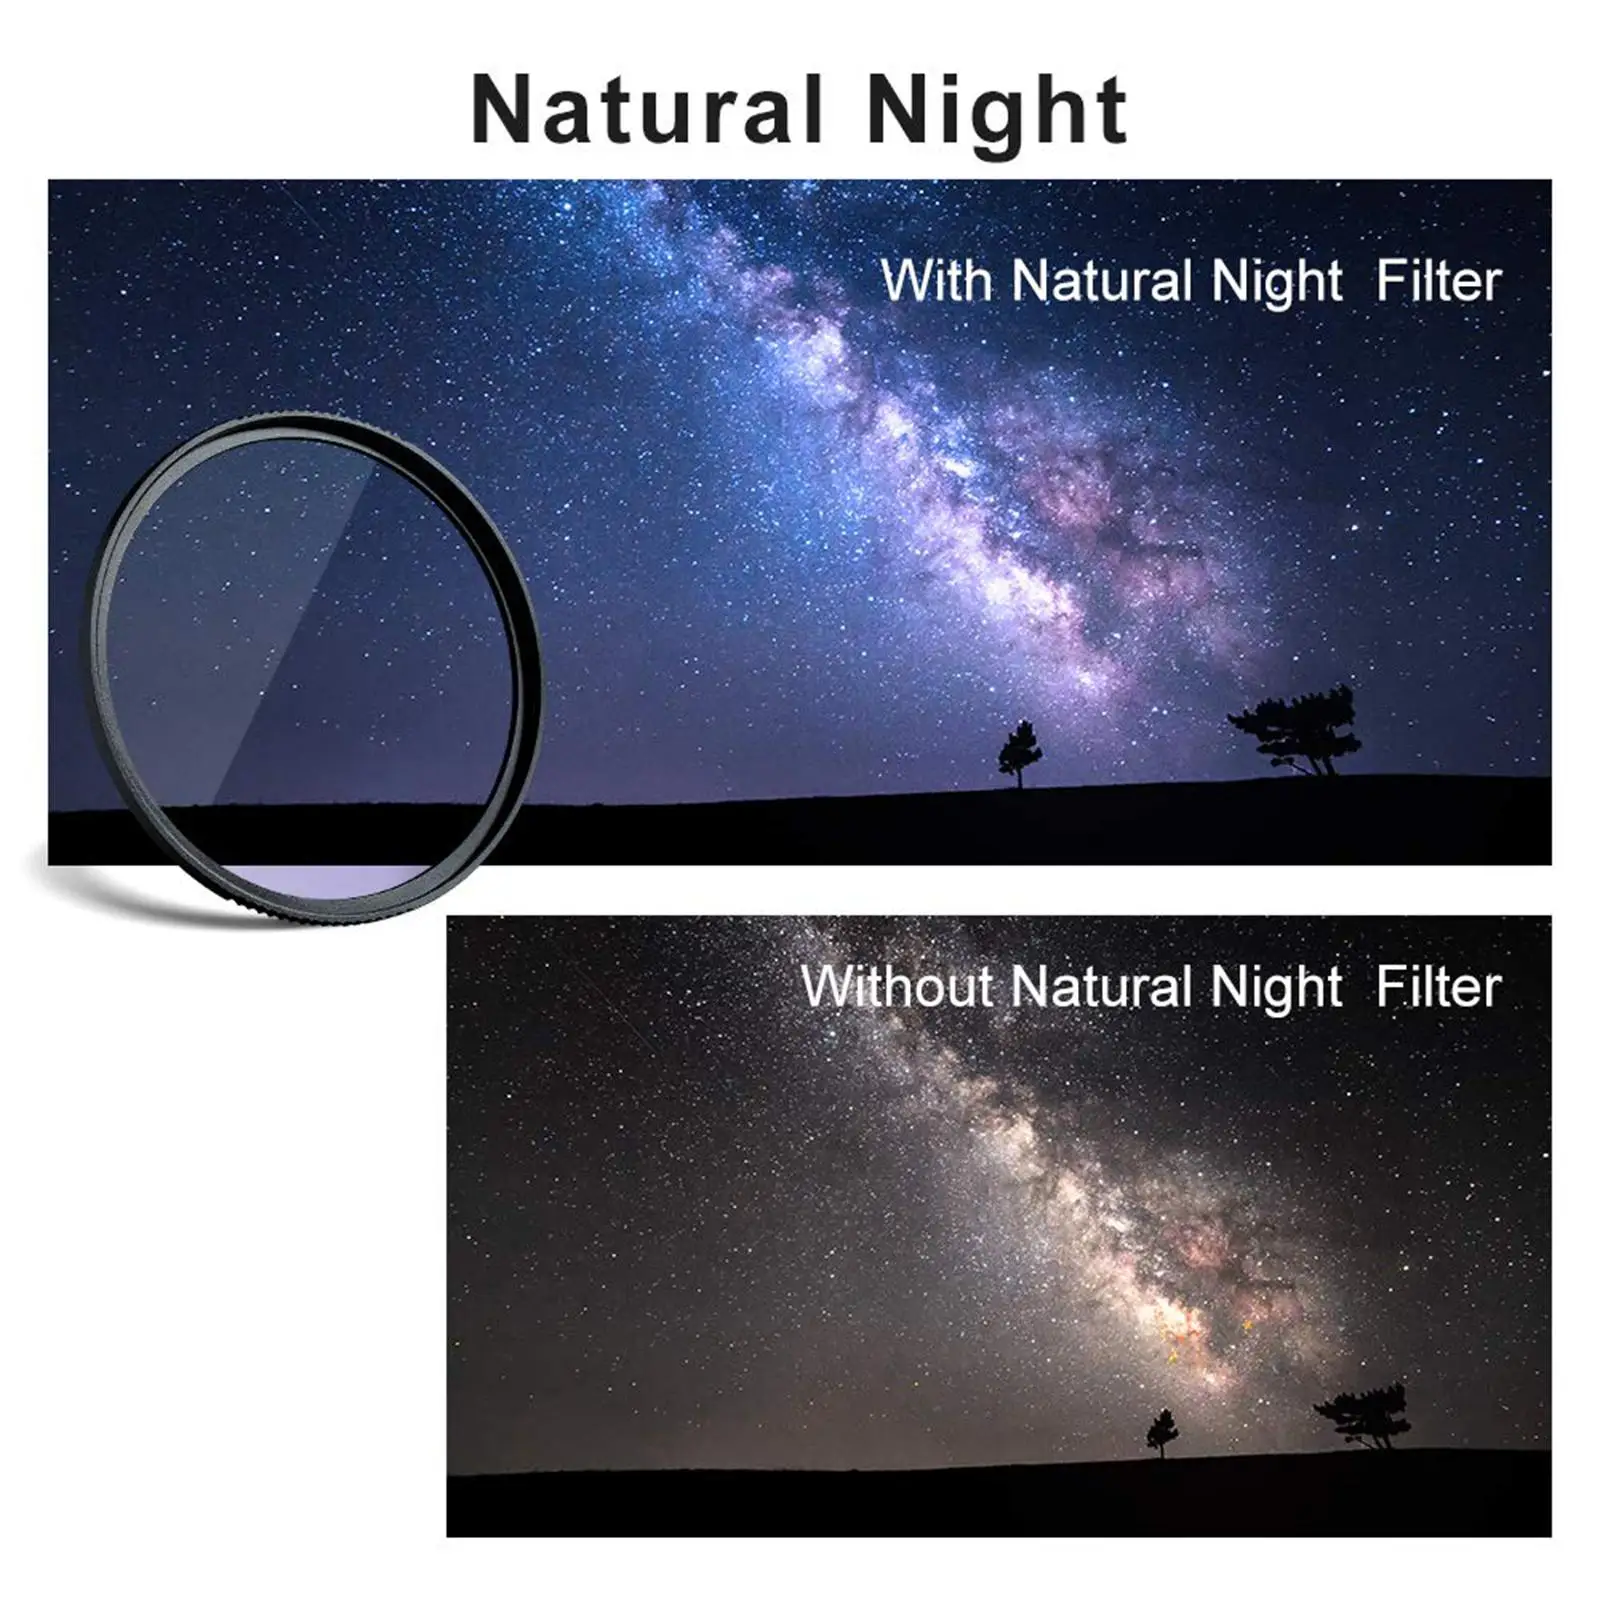 Night Filter for Night Sky Photography Waterproof Easily Install Multi Layer Optical Glass Material Light Pollution Reduction